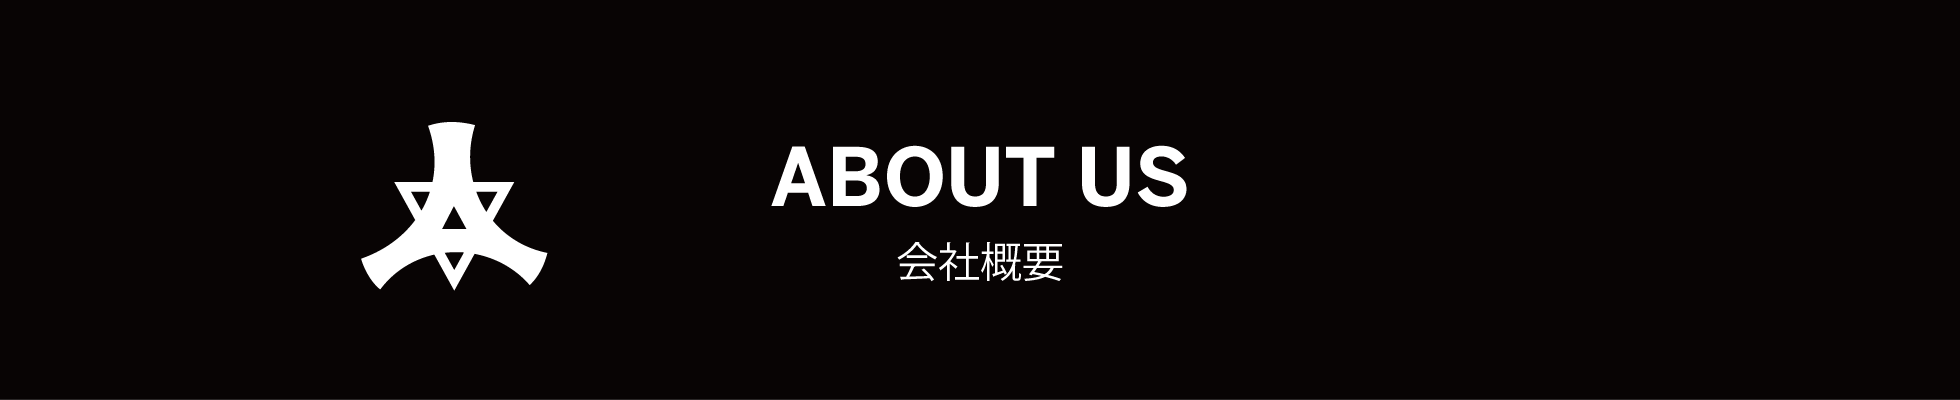 ABOUT US　会社概要